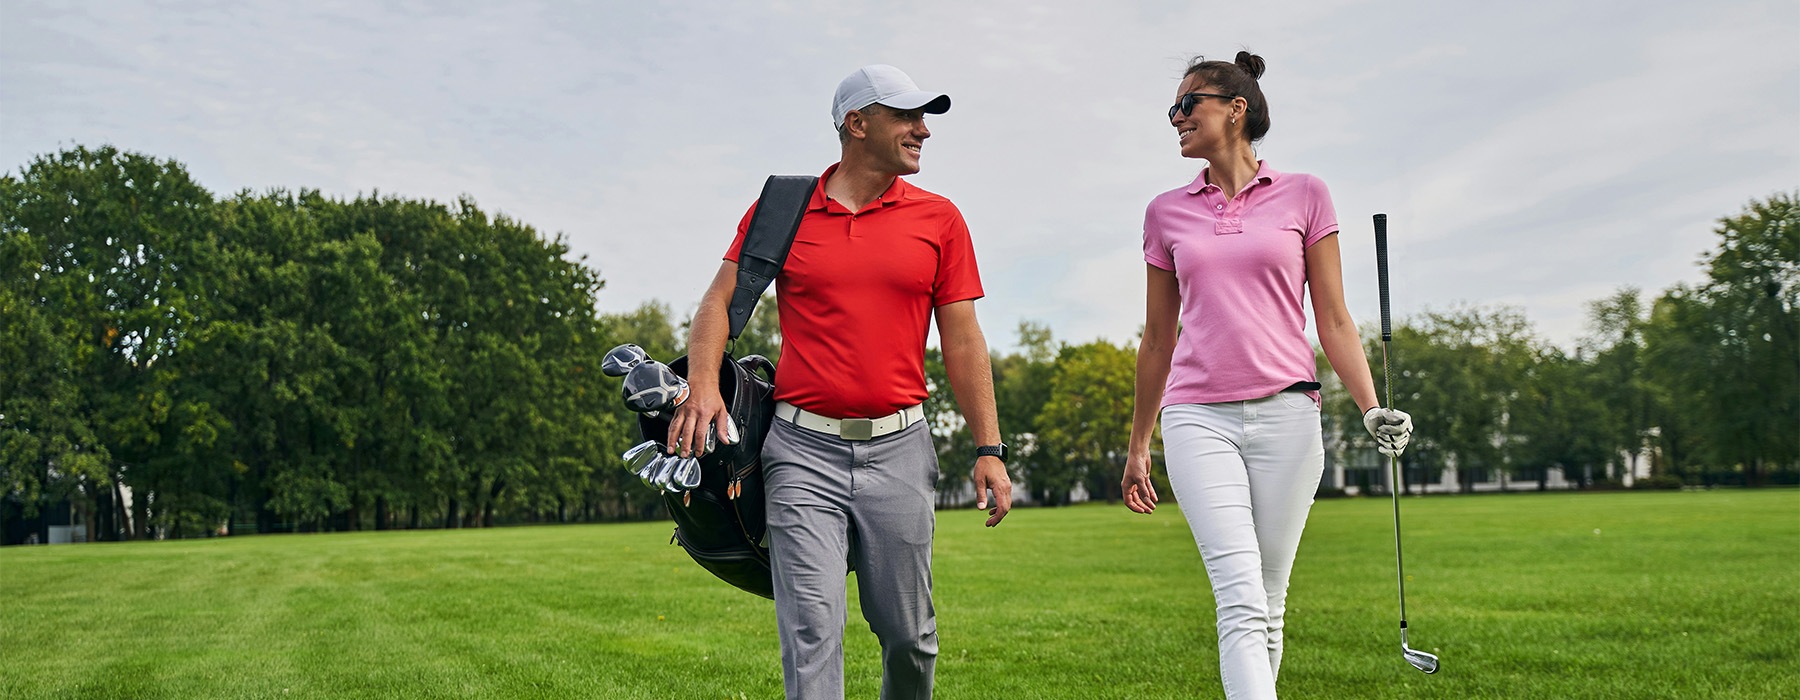 a man and a woman on a golf course